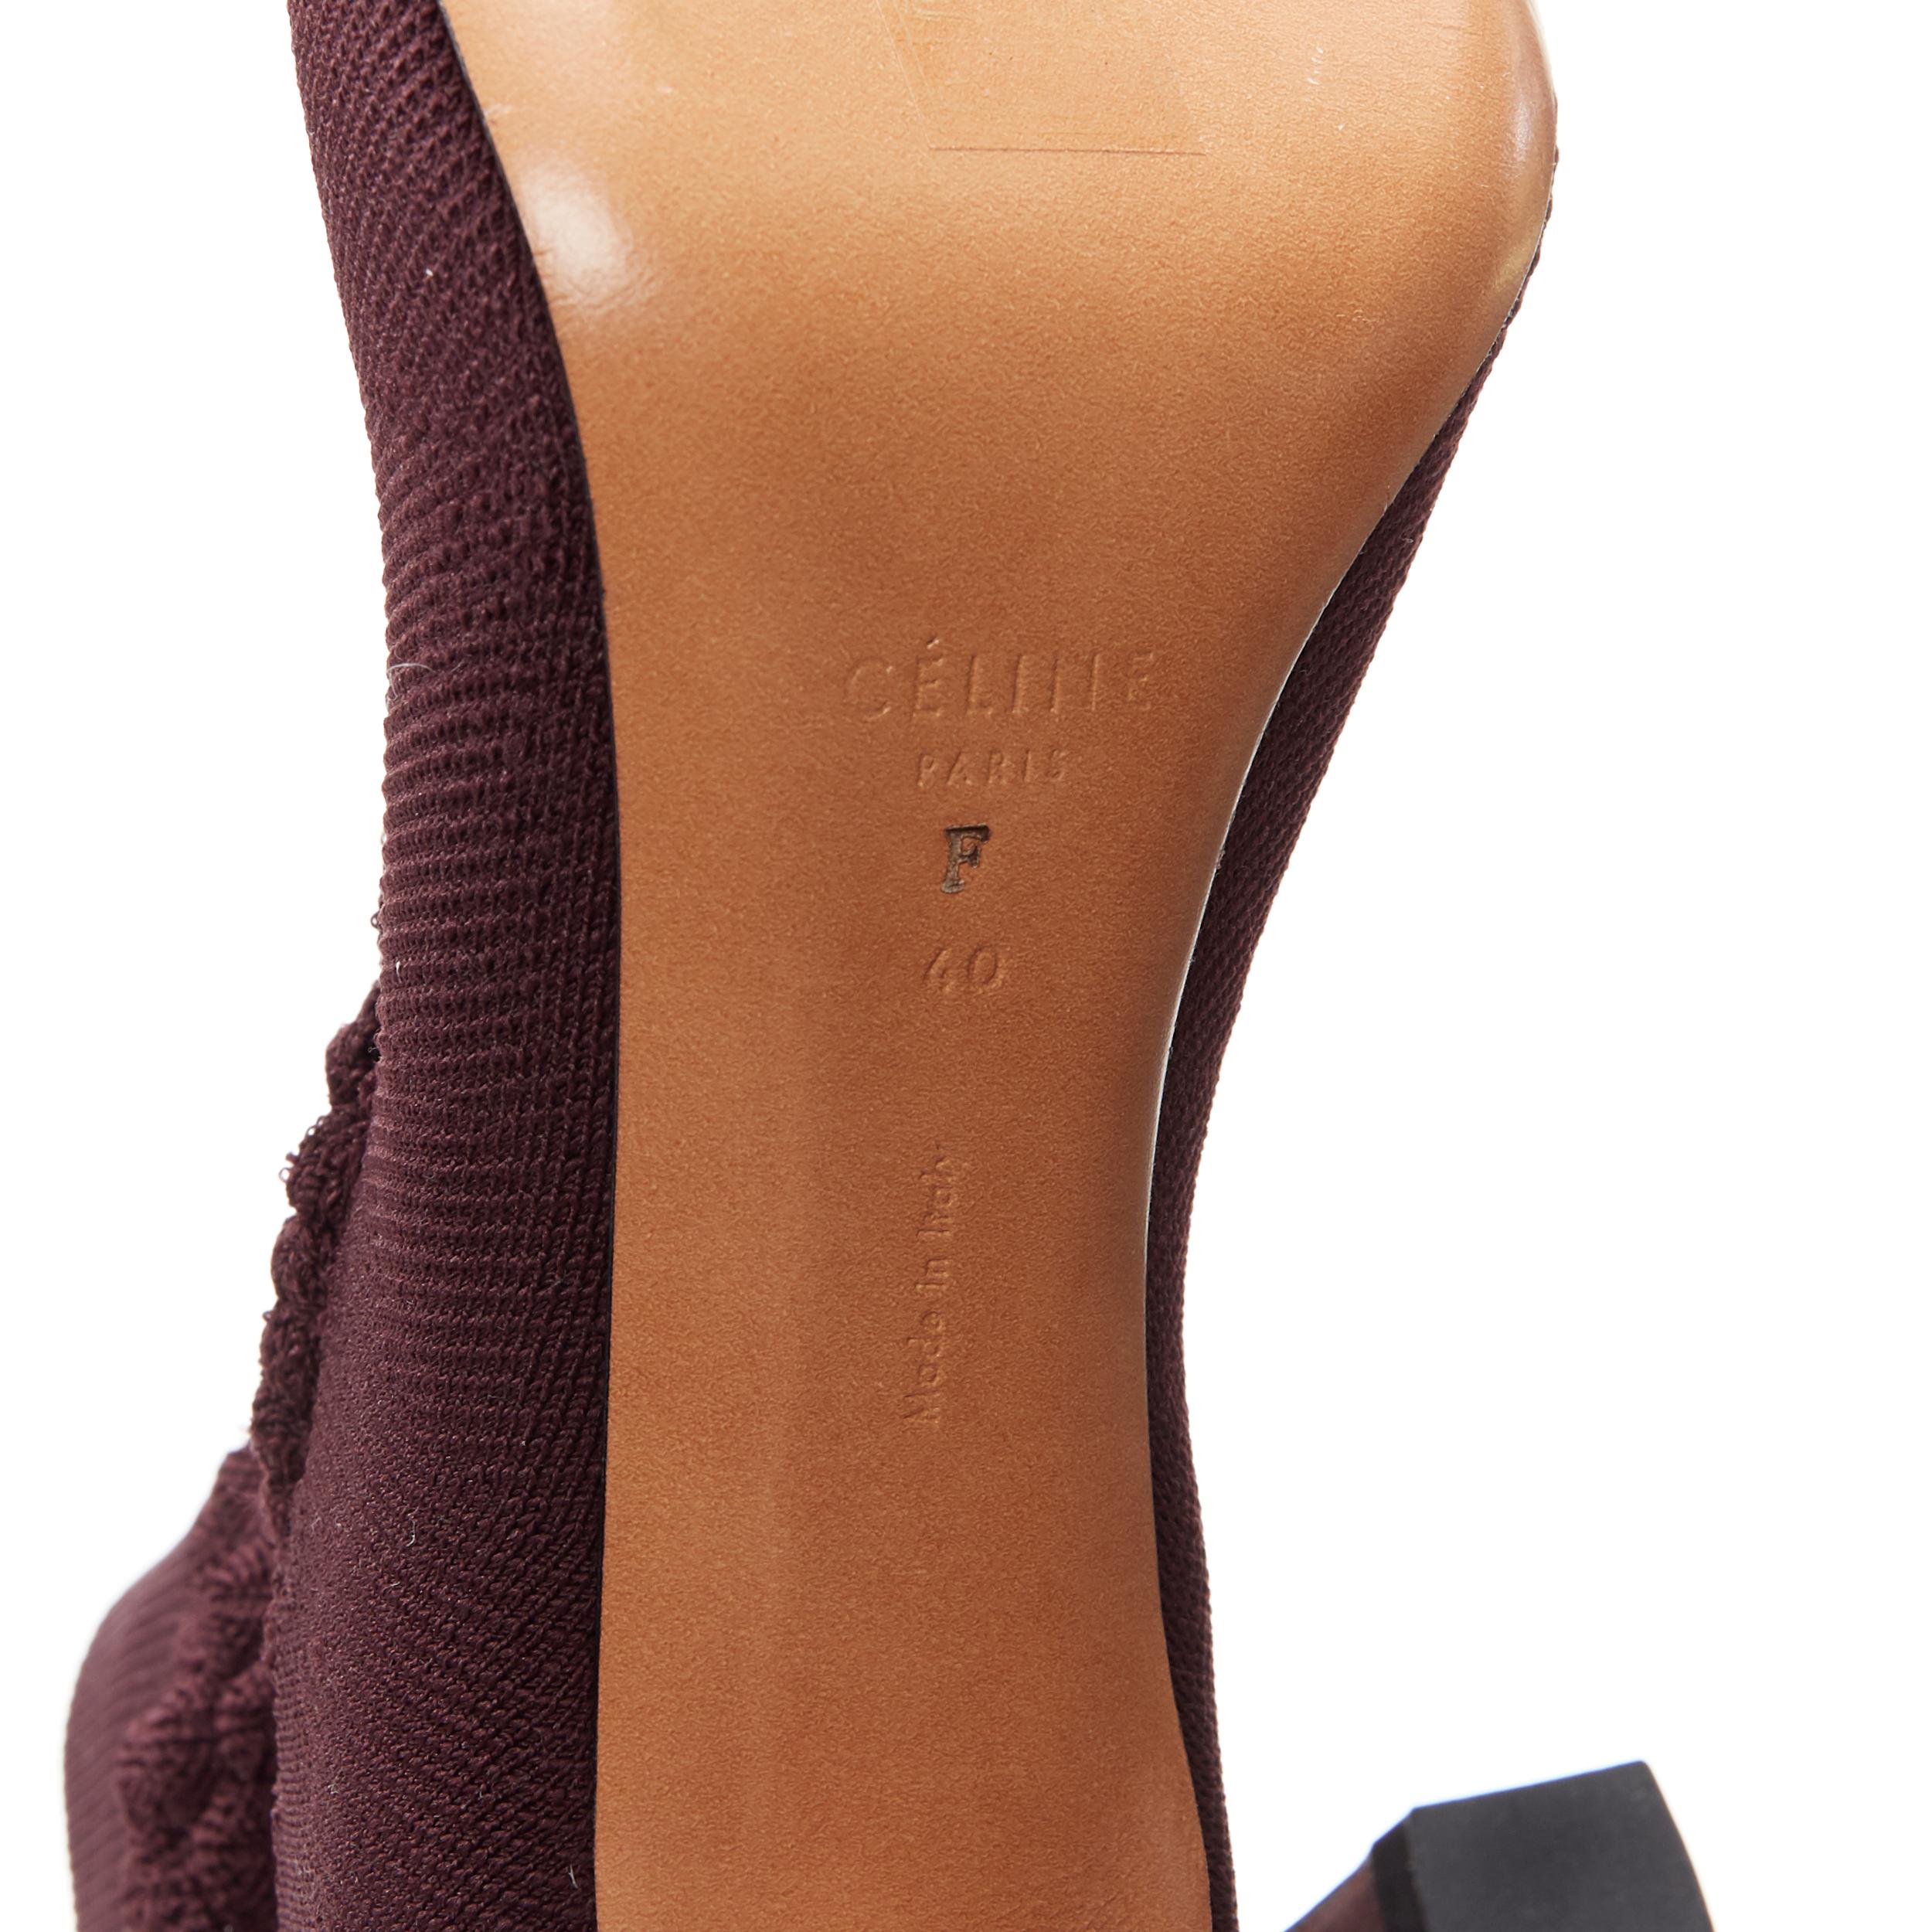 new OLD CELINE Glove Bootie burgundy textured sock knit square toe boots EU40 For Sale 3